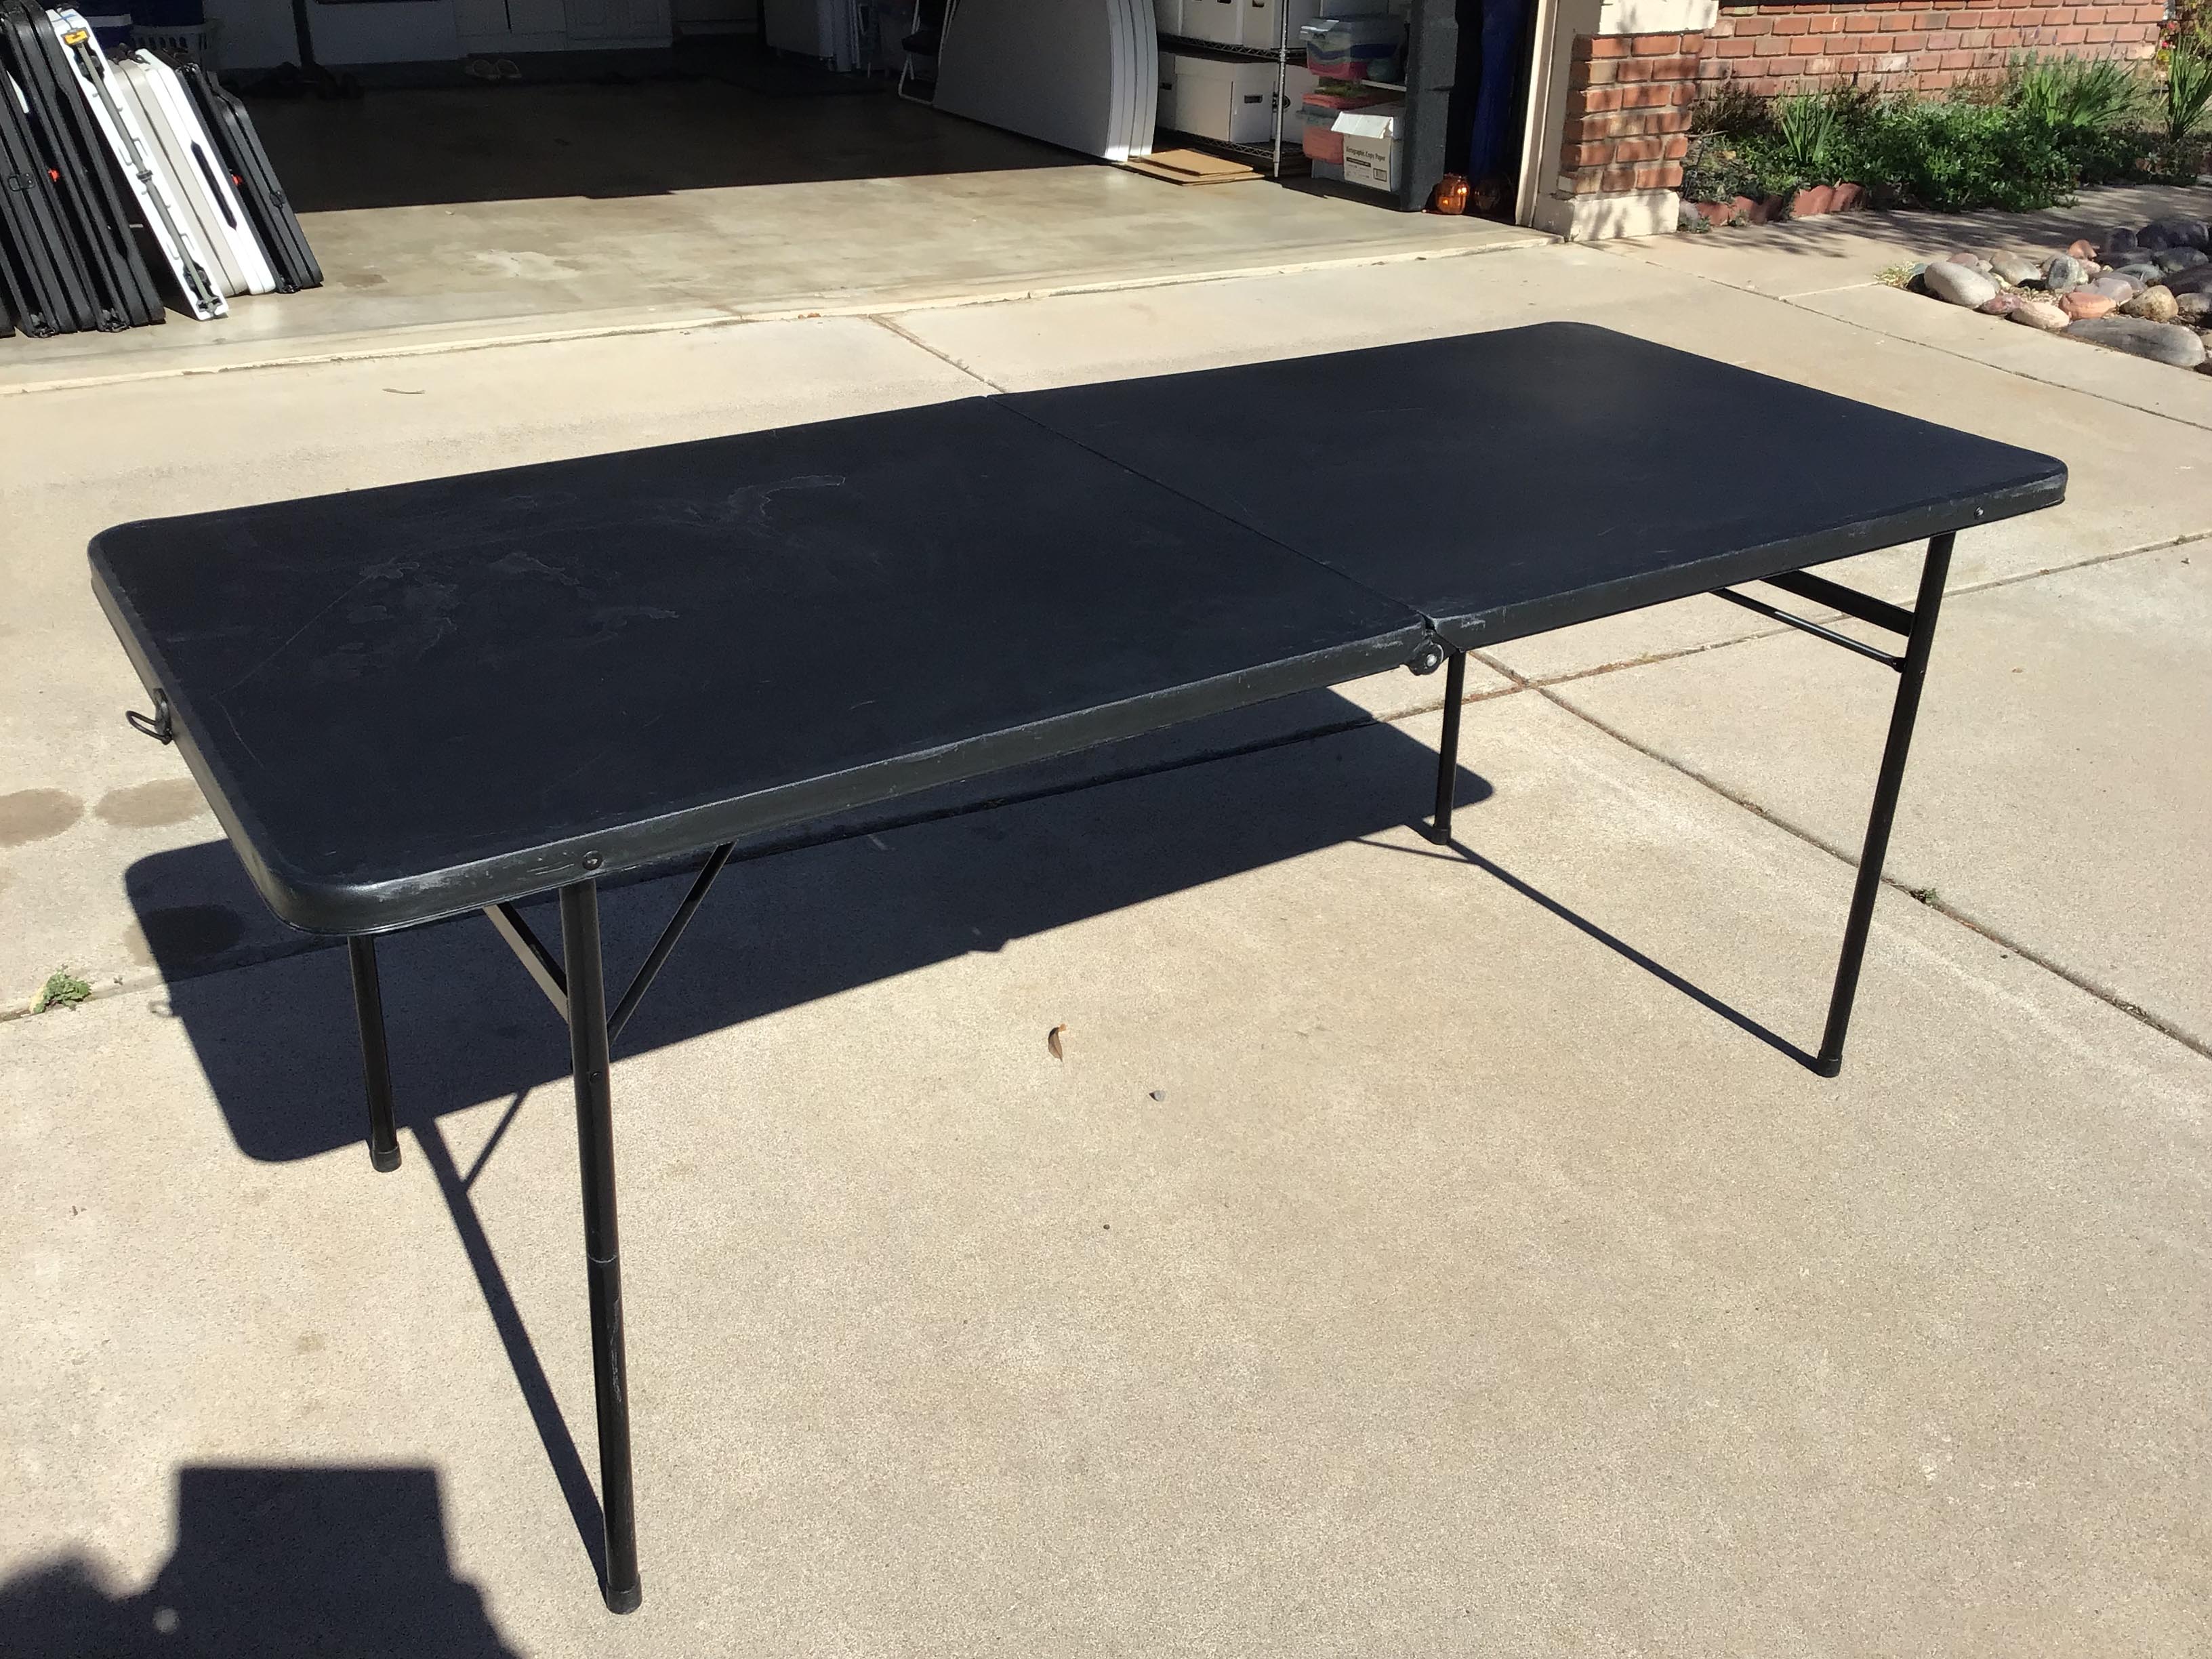 6 foot rectangle tables